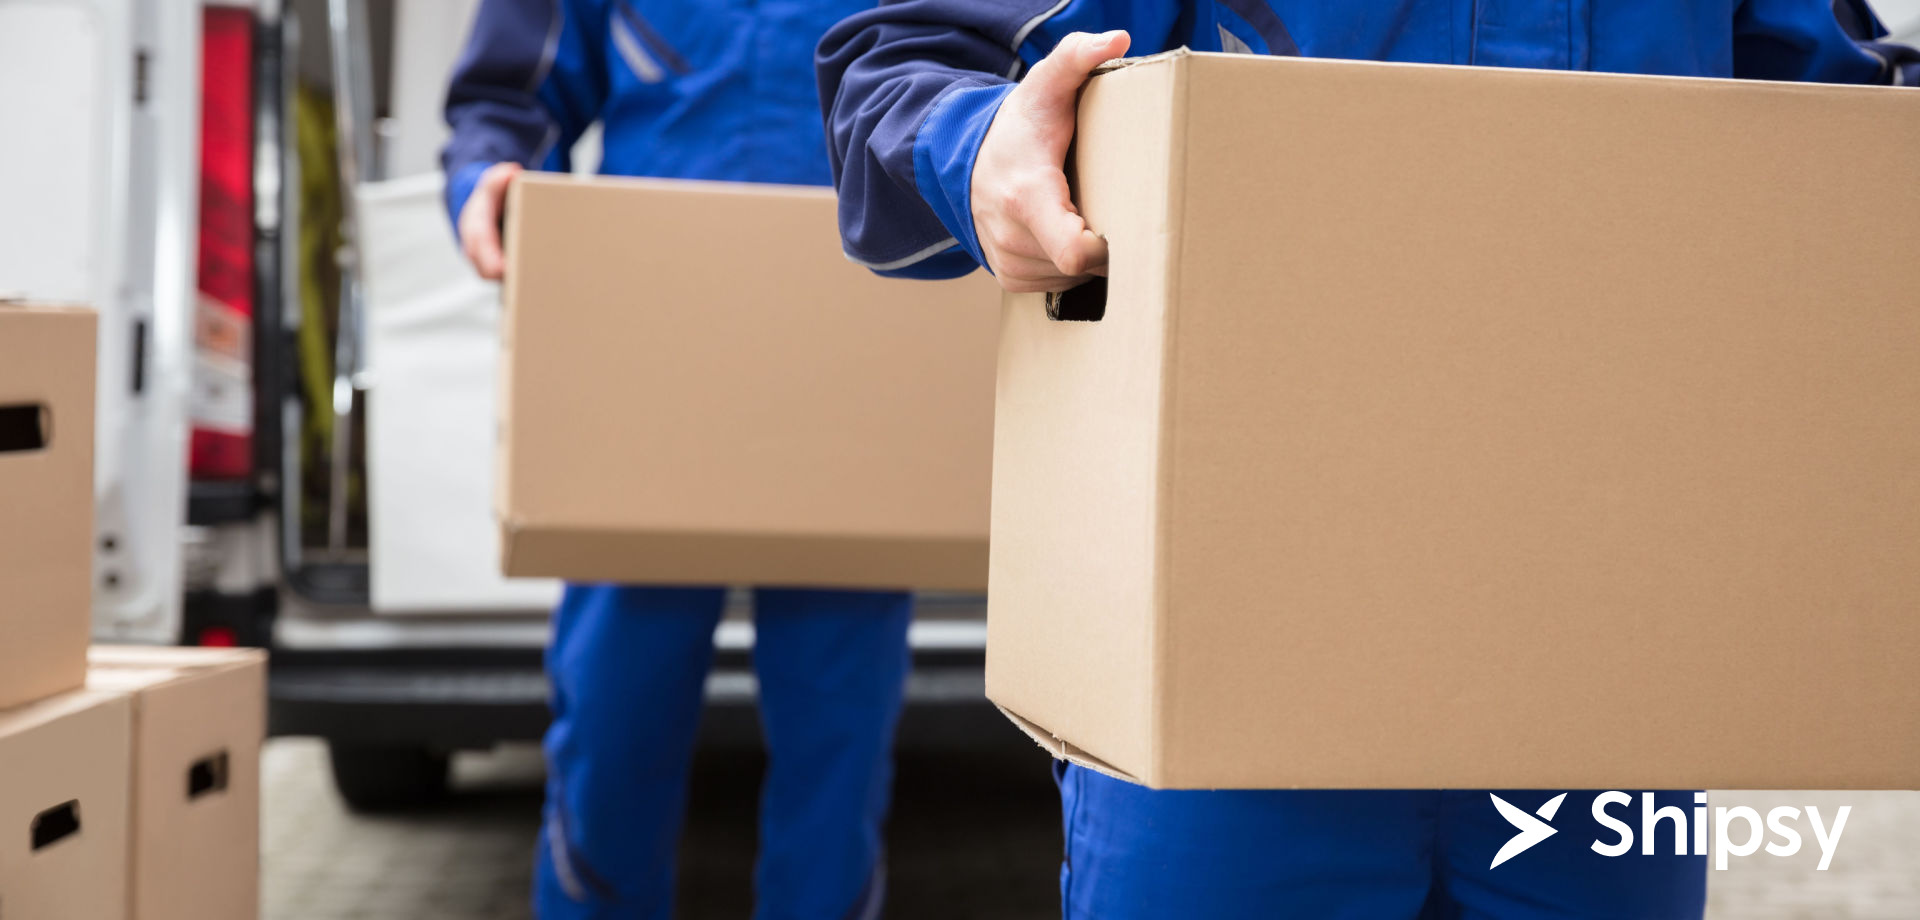 Three Reasons Why Partnering With Multiple Couriers Will Only Increase